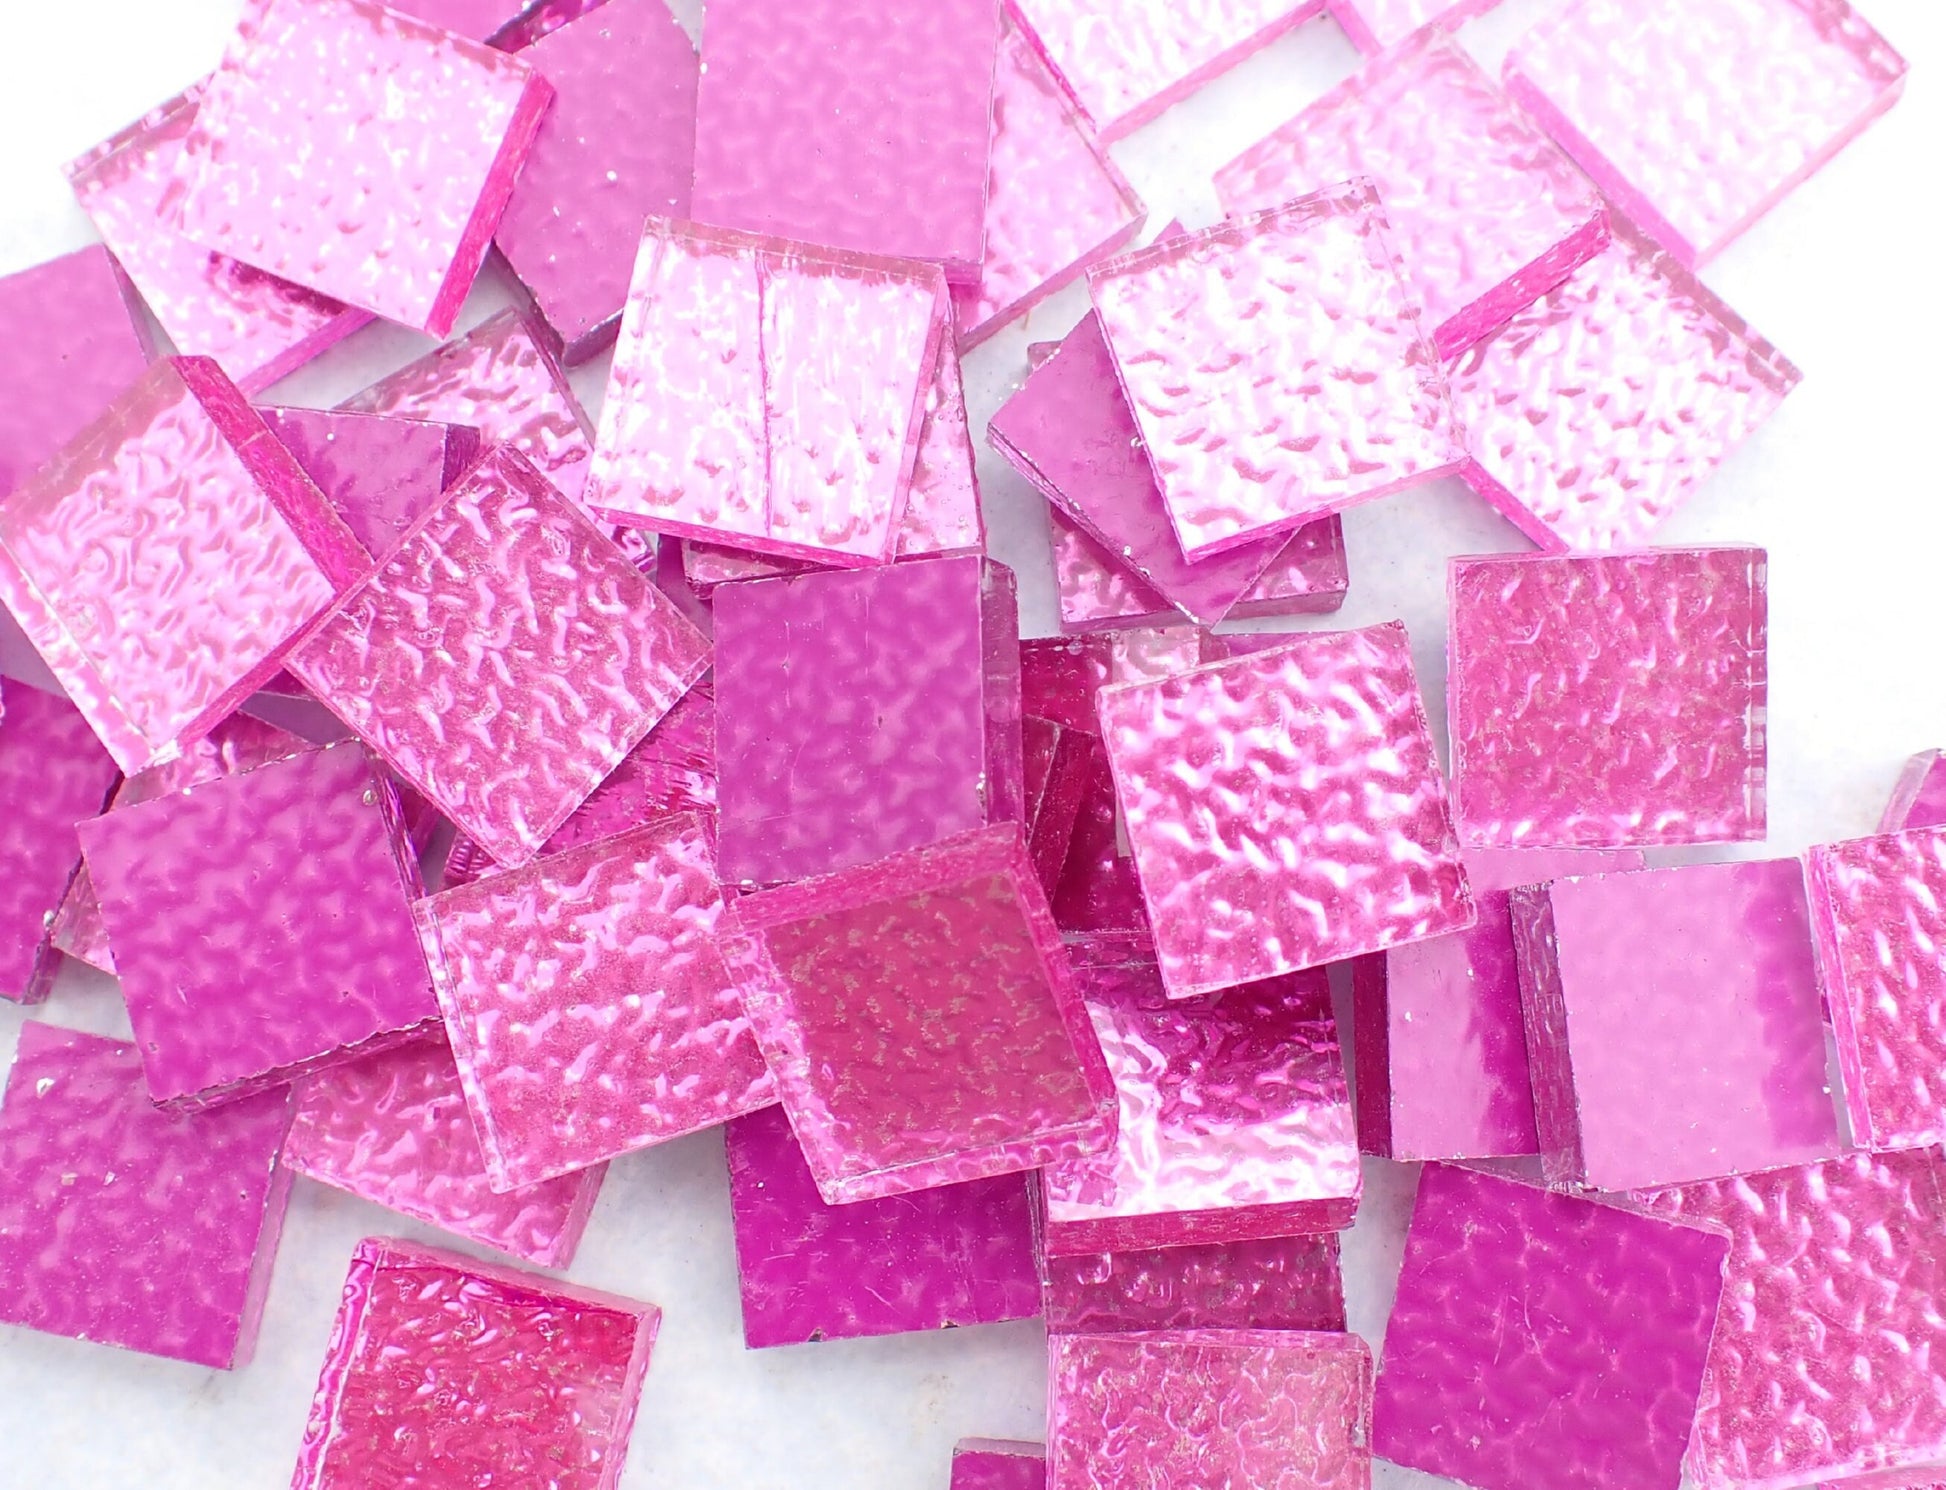 Fuchsia Textured Mirror Square Tiles - 50g - Approx 25 Glass Mosaic Tiles - 15mm